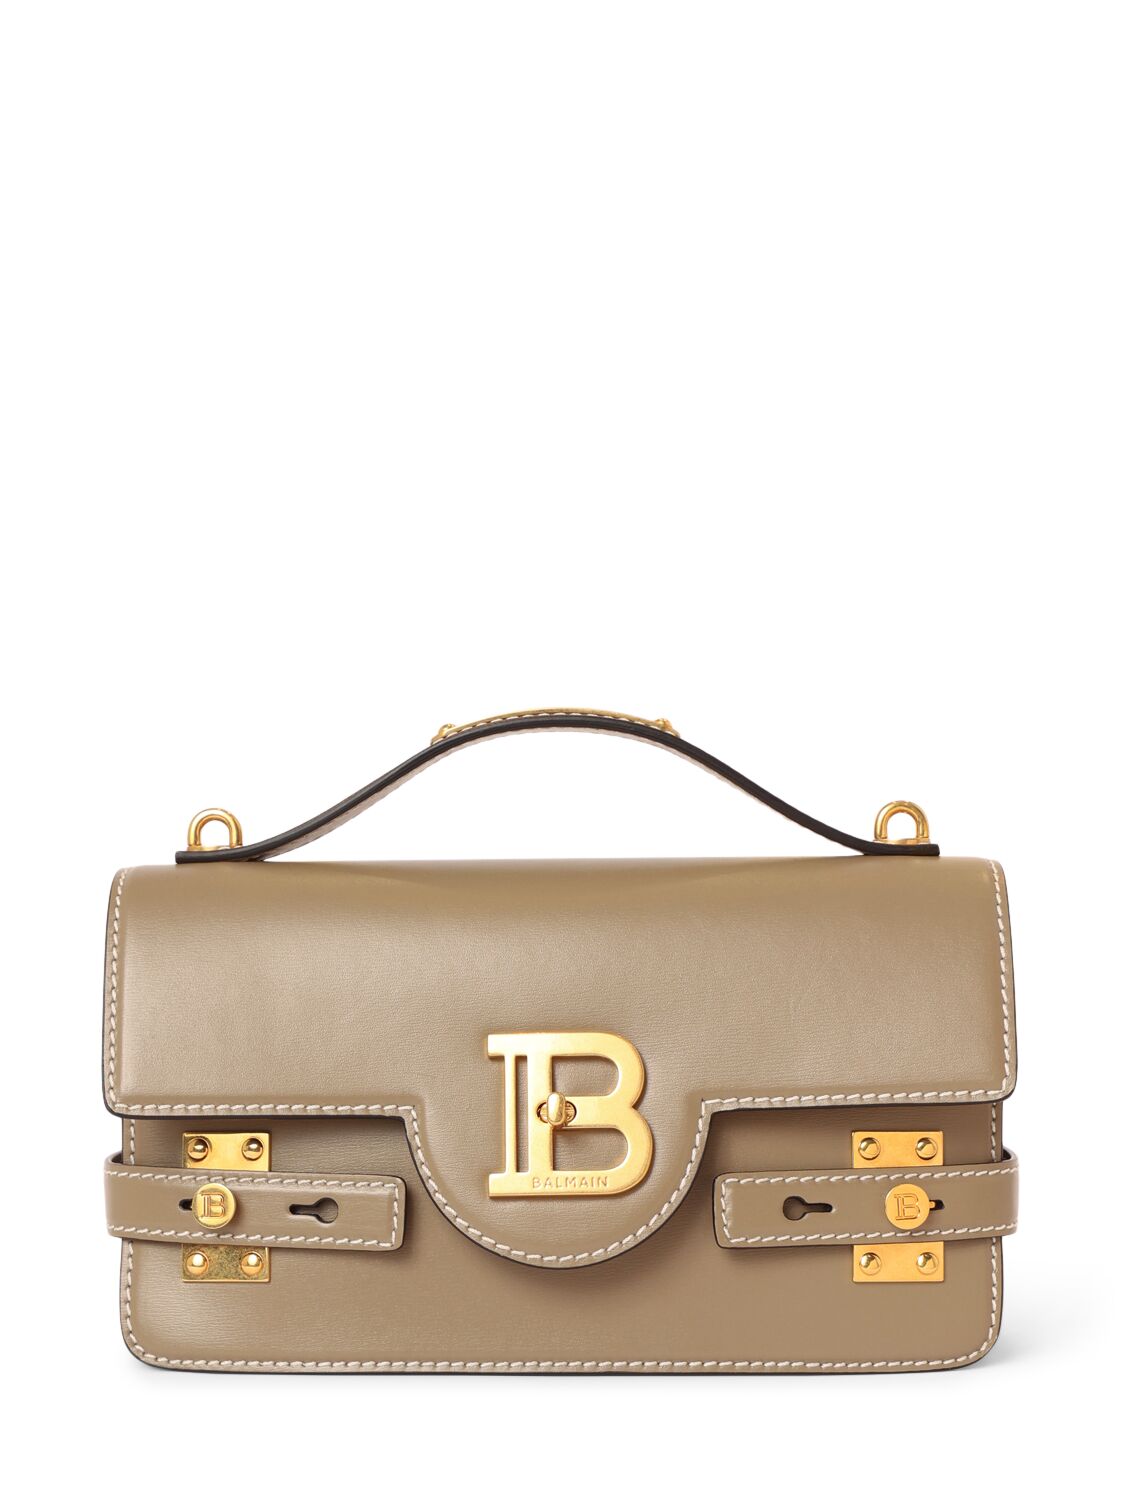 Balmain B-buzz 24 Leather Shoulder Bag In Taupe